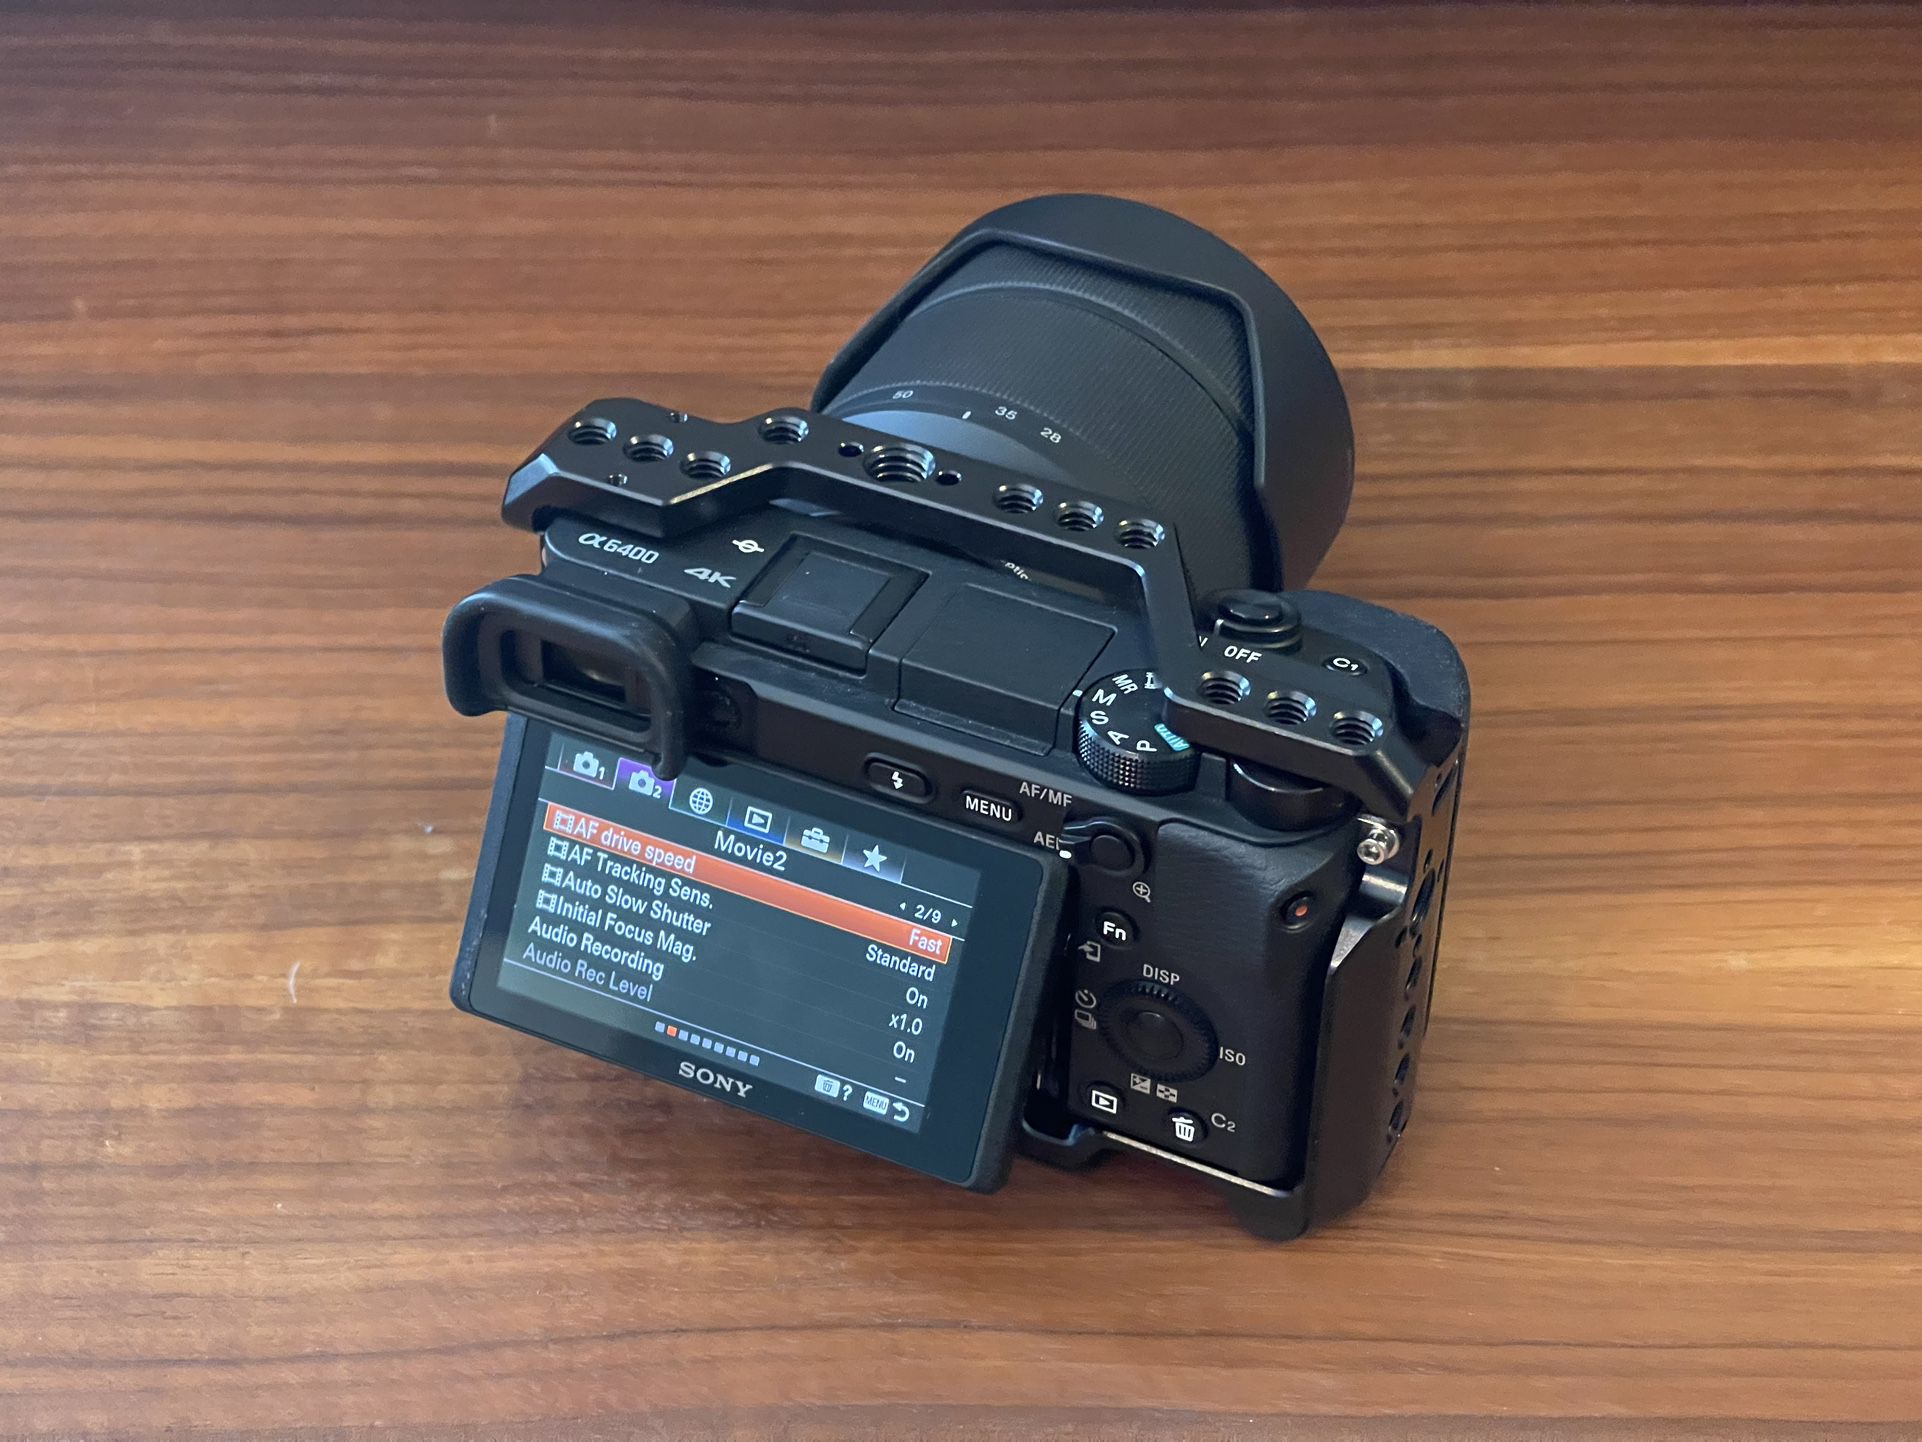 Sony a6400 with 3 lenses ~ 850 shutter, Mint condition